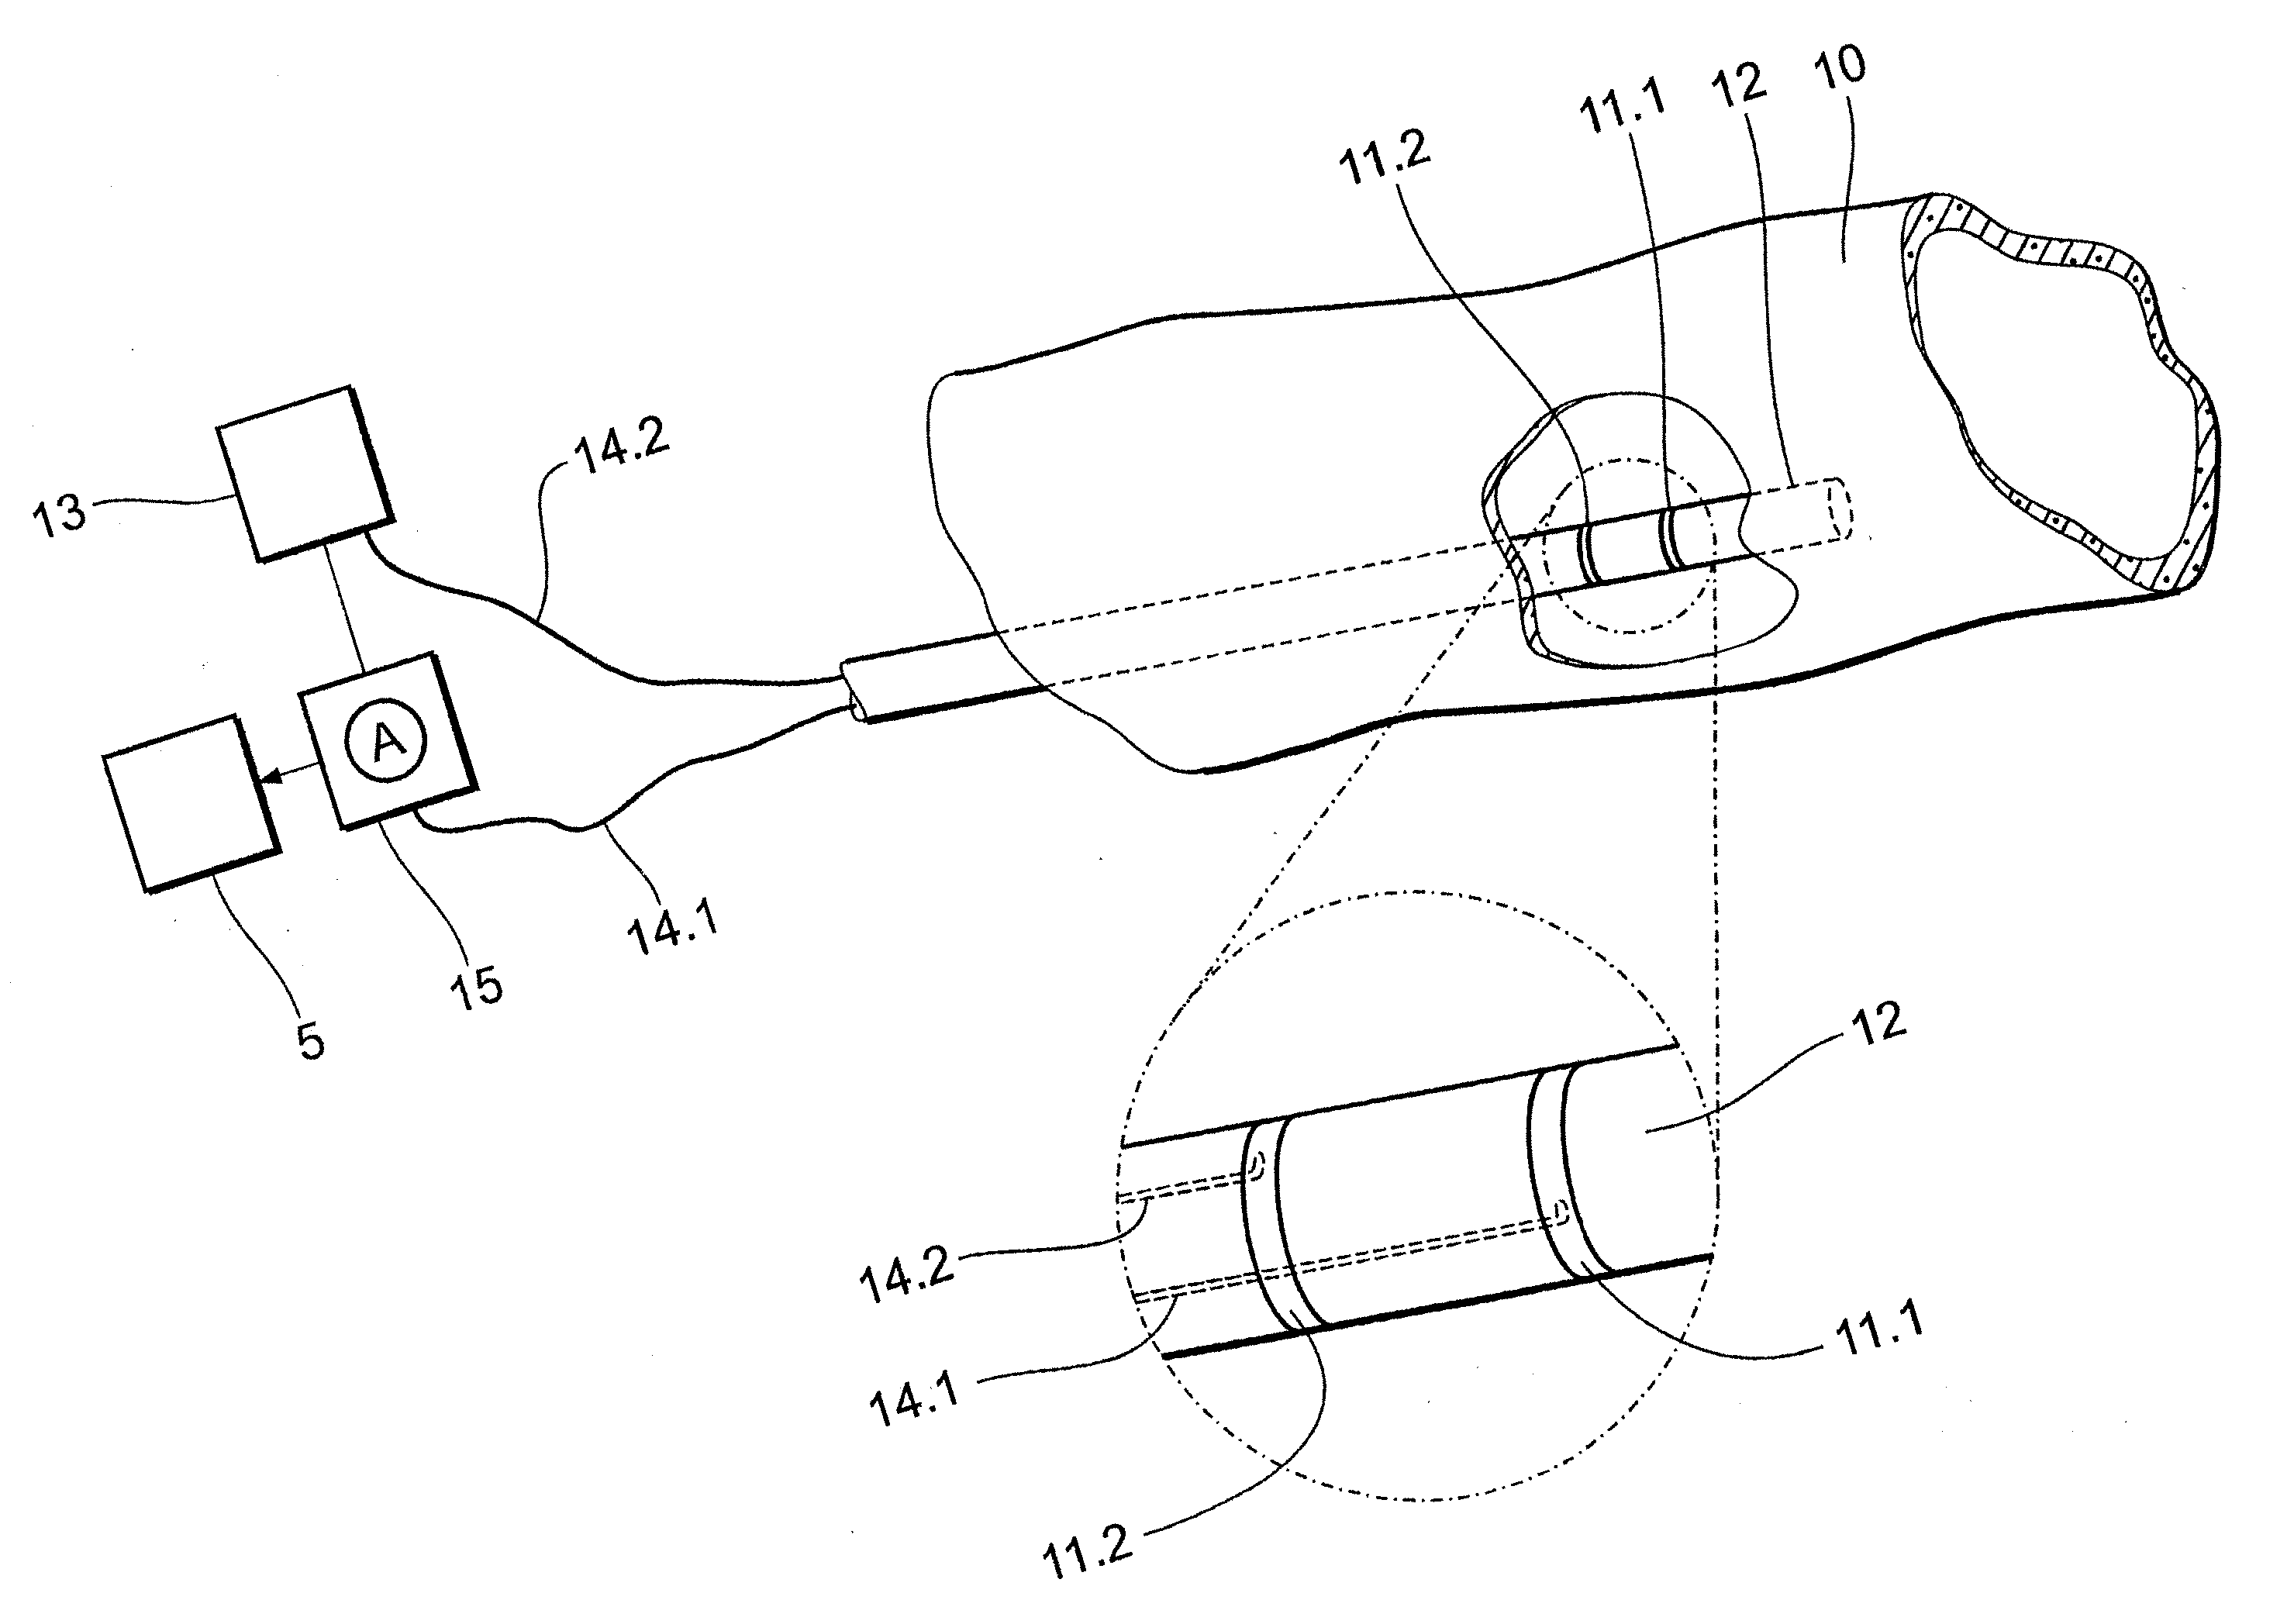 Electrical therapy device